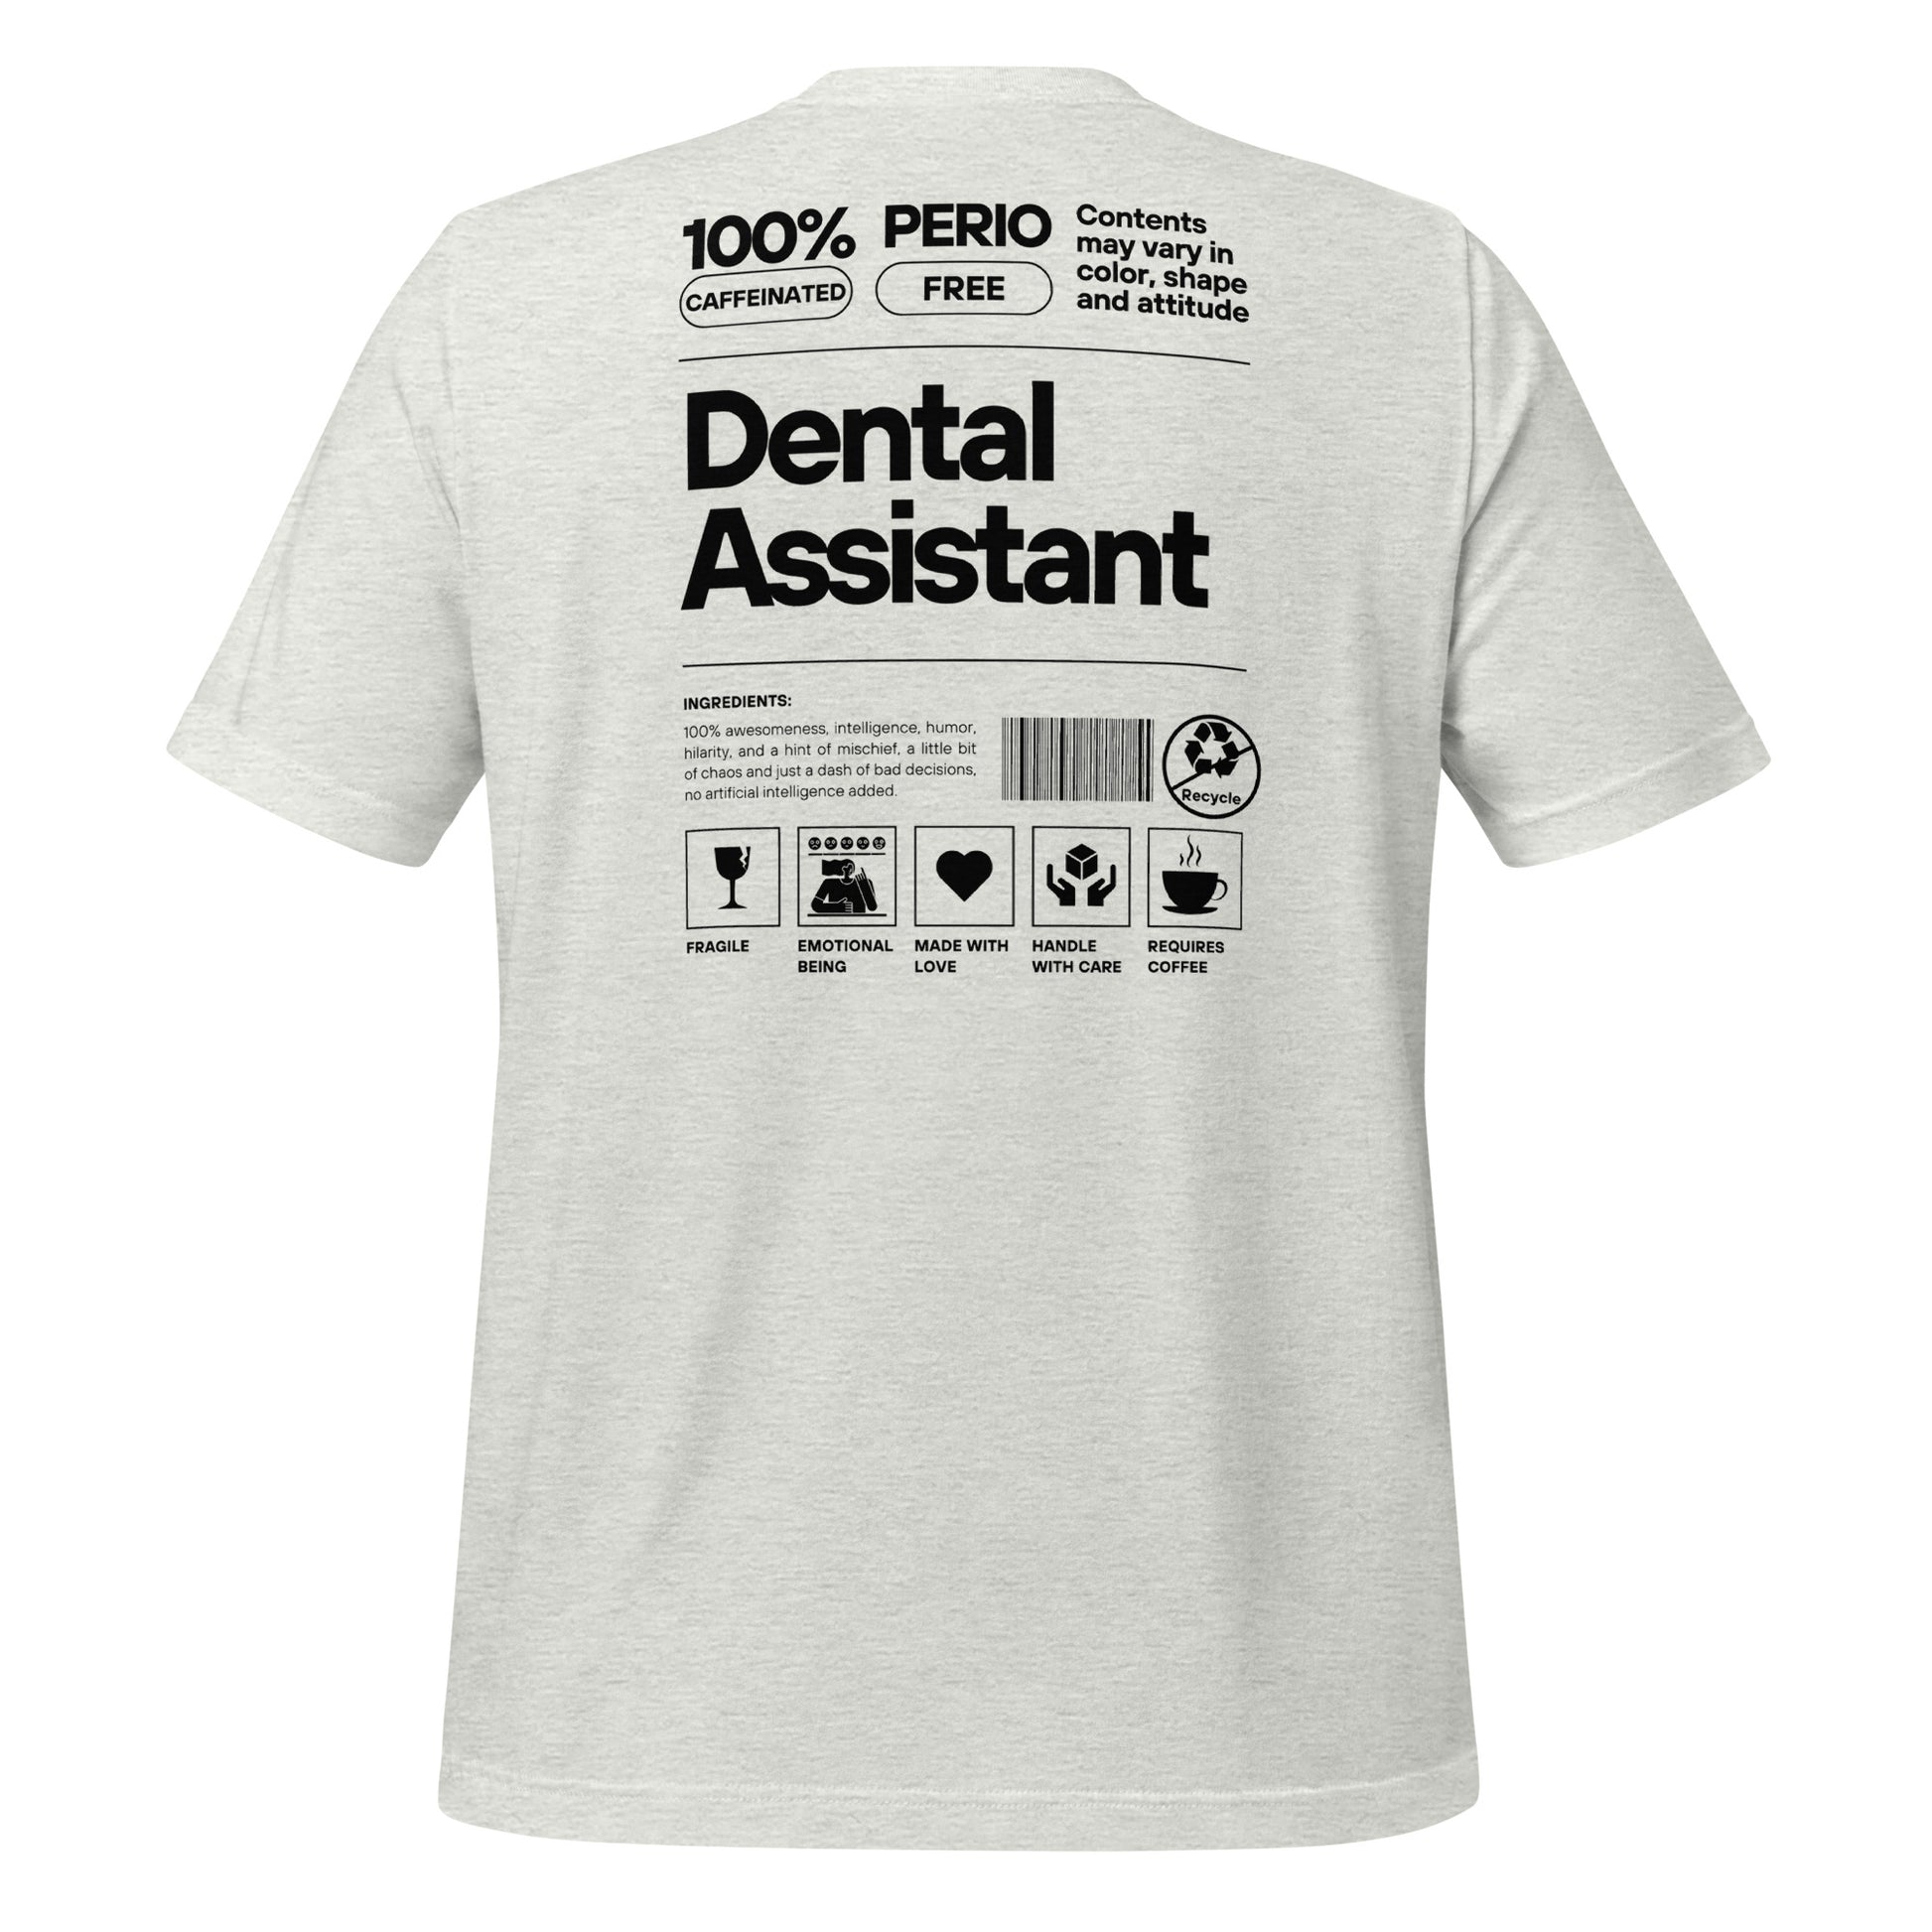 Ash dental assistant shirt featuring a creative label design with icons and text, perfect for dental assistants who want to express their identity and passion for their job - dental shirts back view.